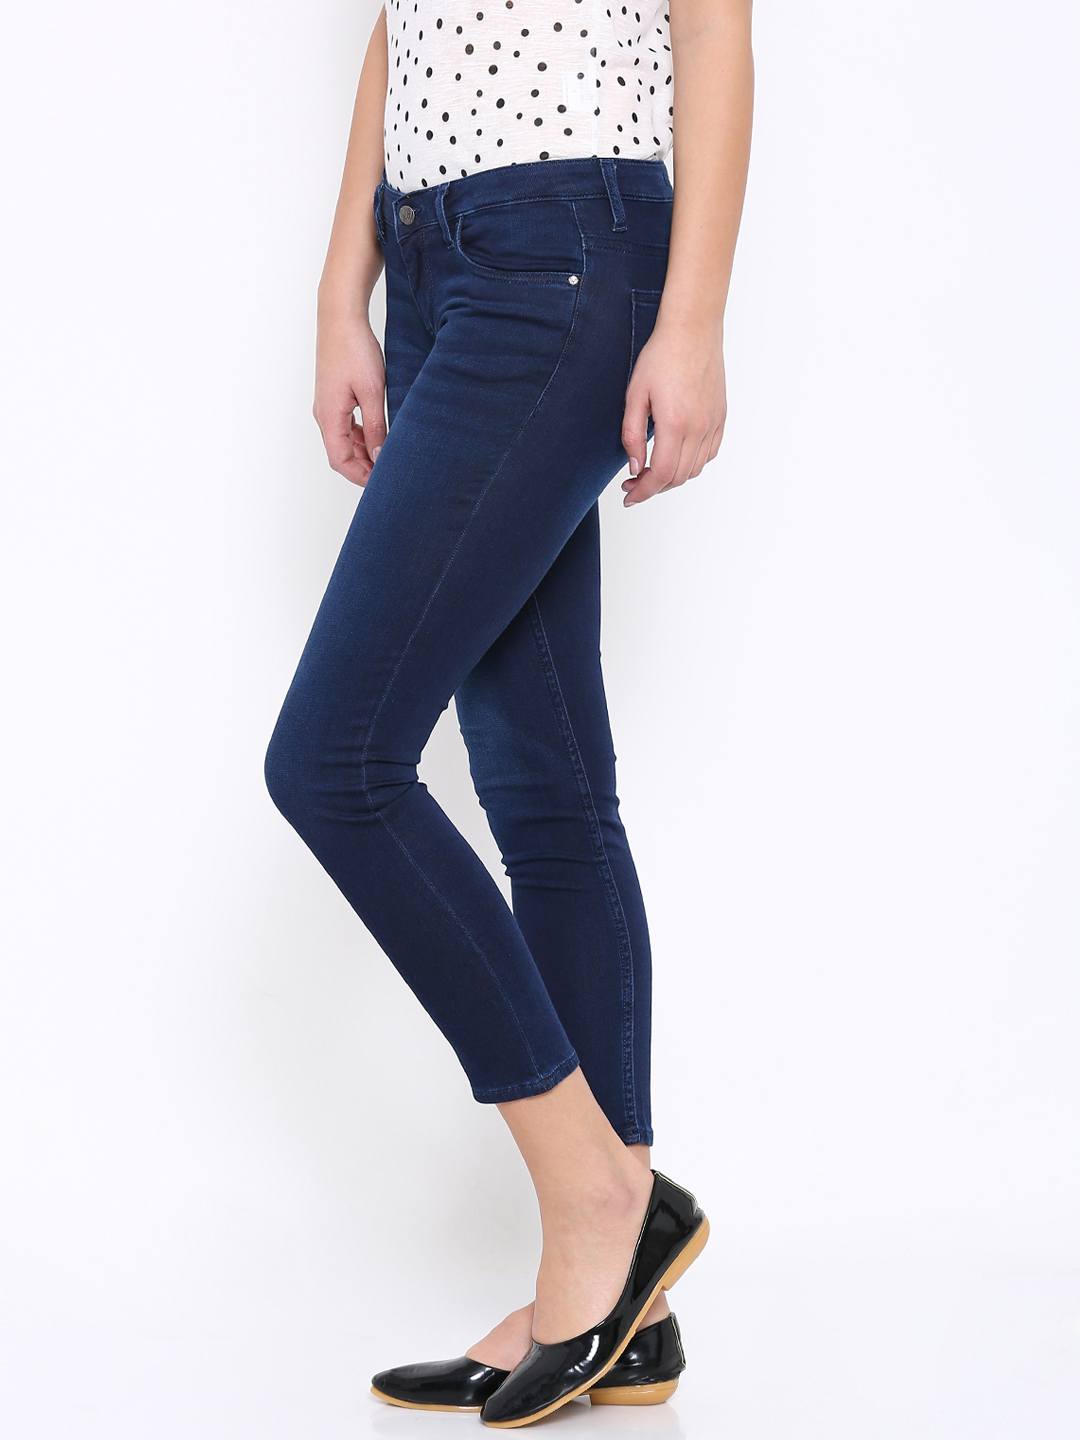 burberry jeans womens price